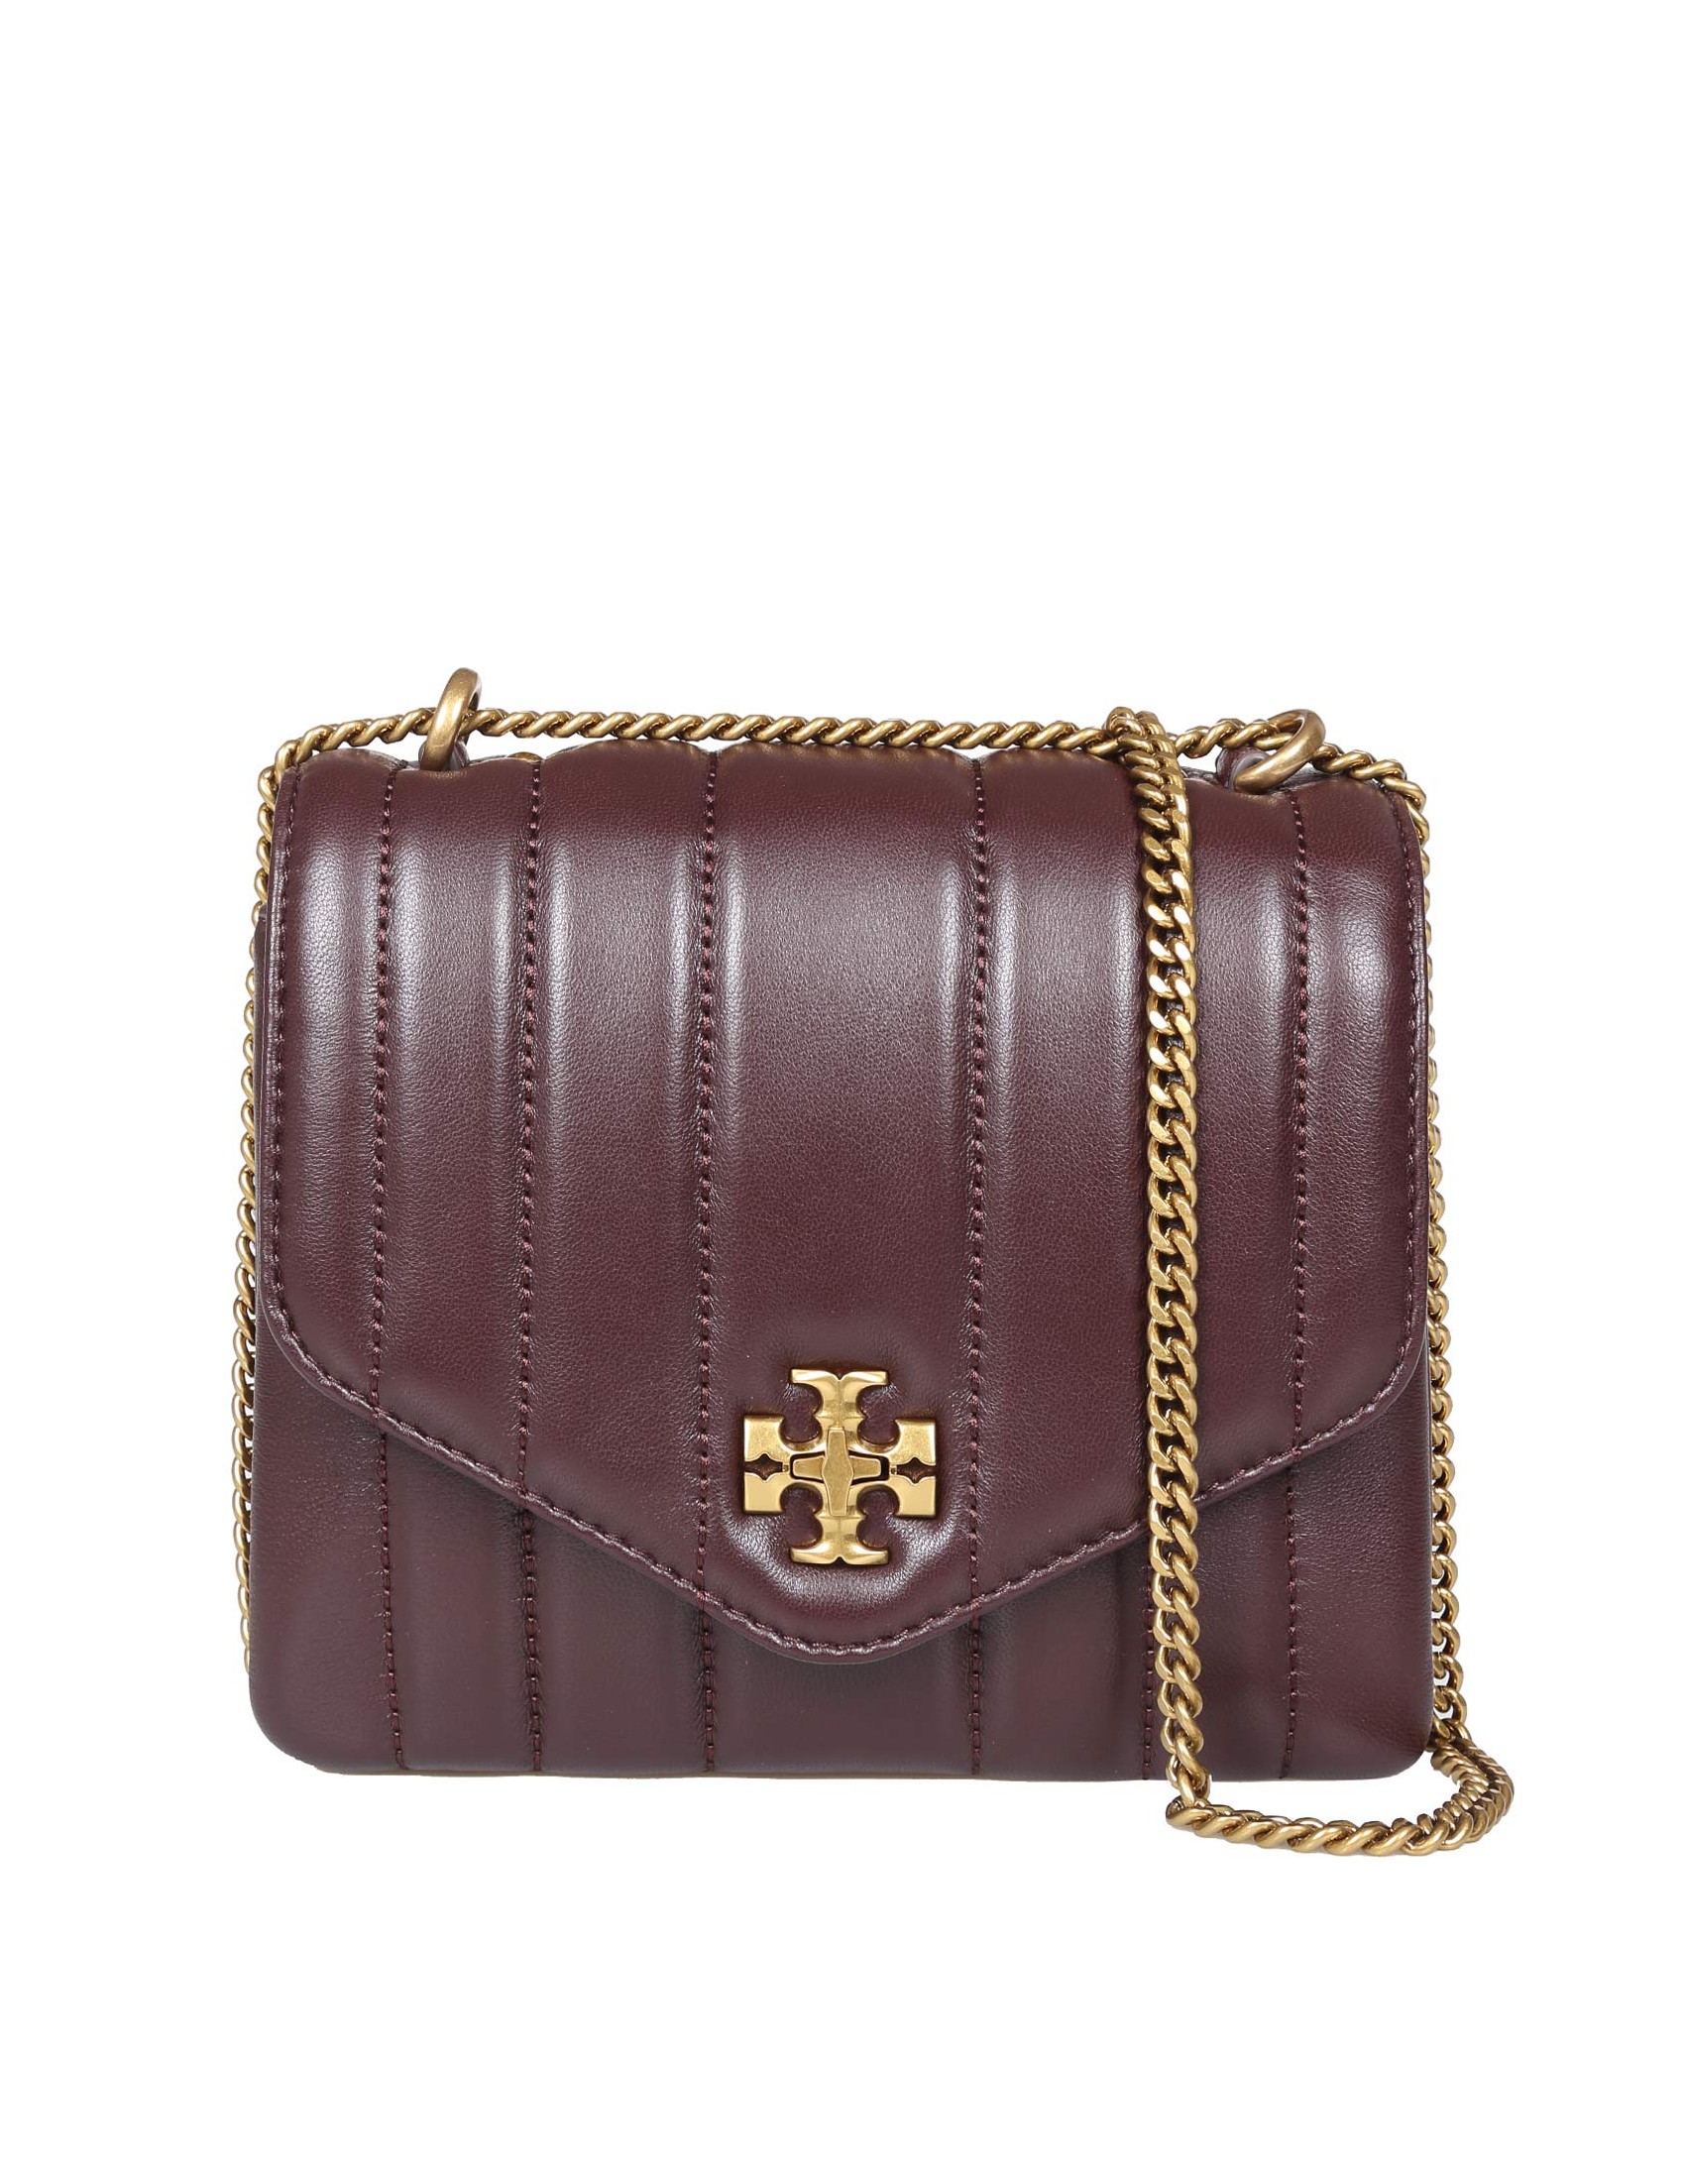 TORY BURCH KIRA SQUARE CROSSBODY IN QUILTED LEATHER